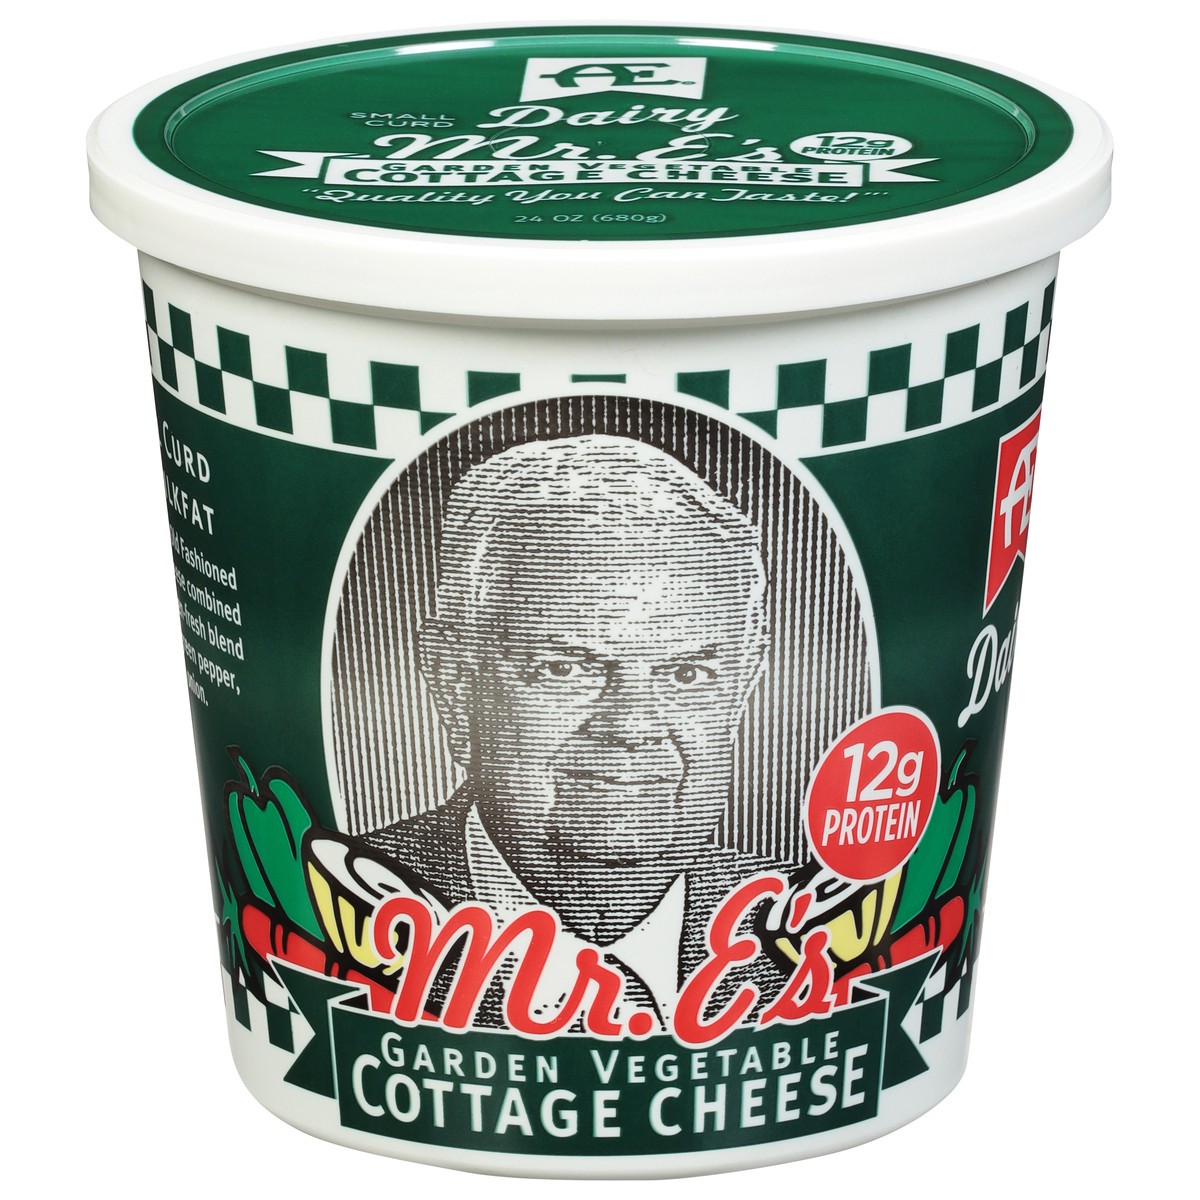 slide 1 of 1, AE Dairy 4% Milkfat Small Curd Garden Vegetable Cottage Cheese 24 oz, 24 oz